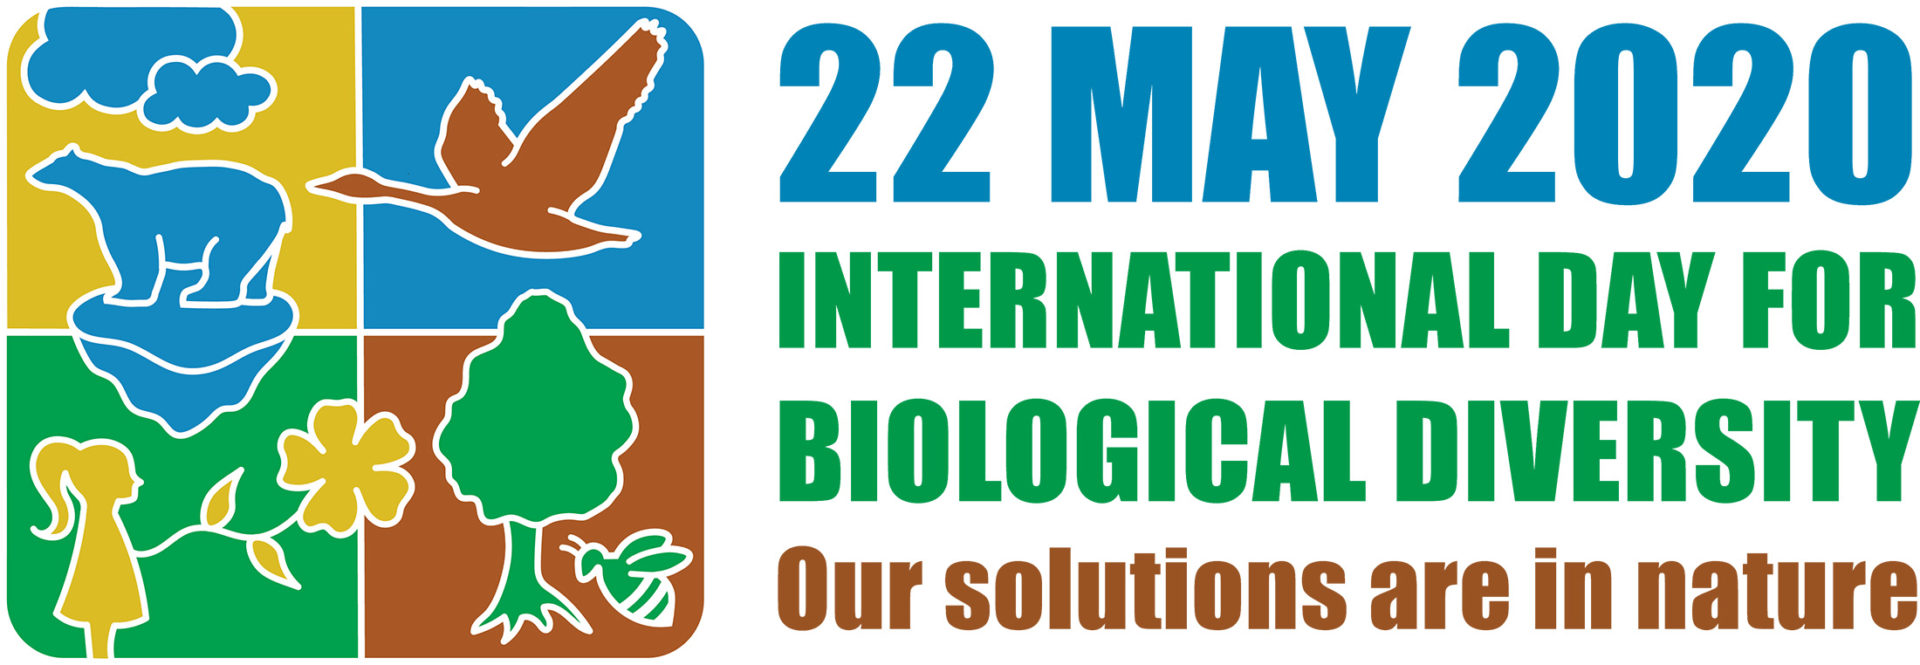 22 May 2020 International Day for Biological Diversity; our Solutions are in Nature